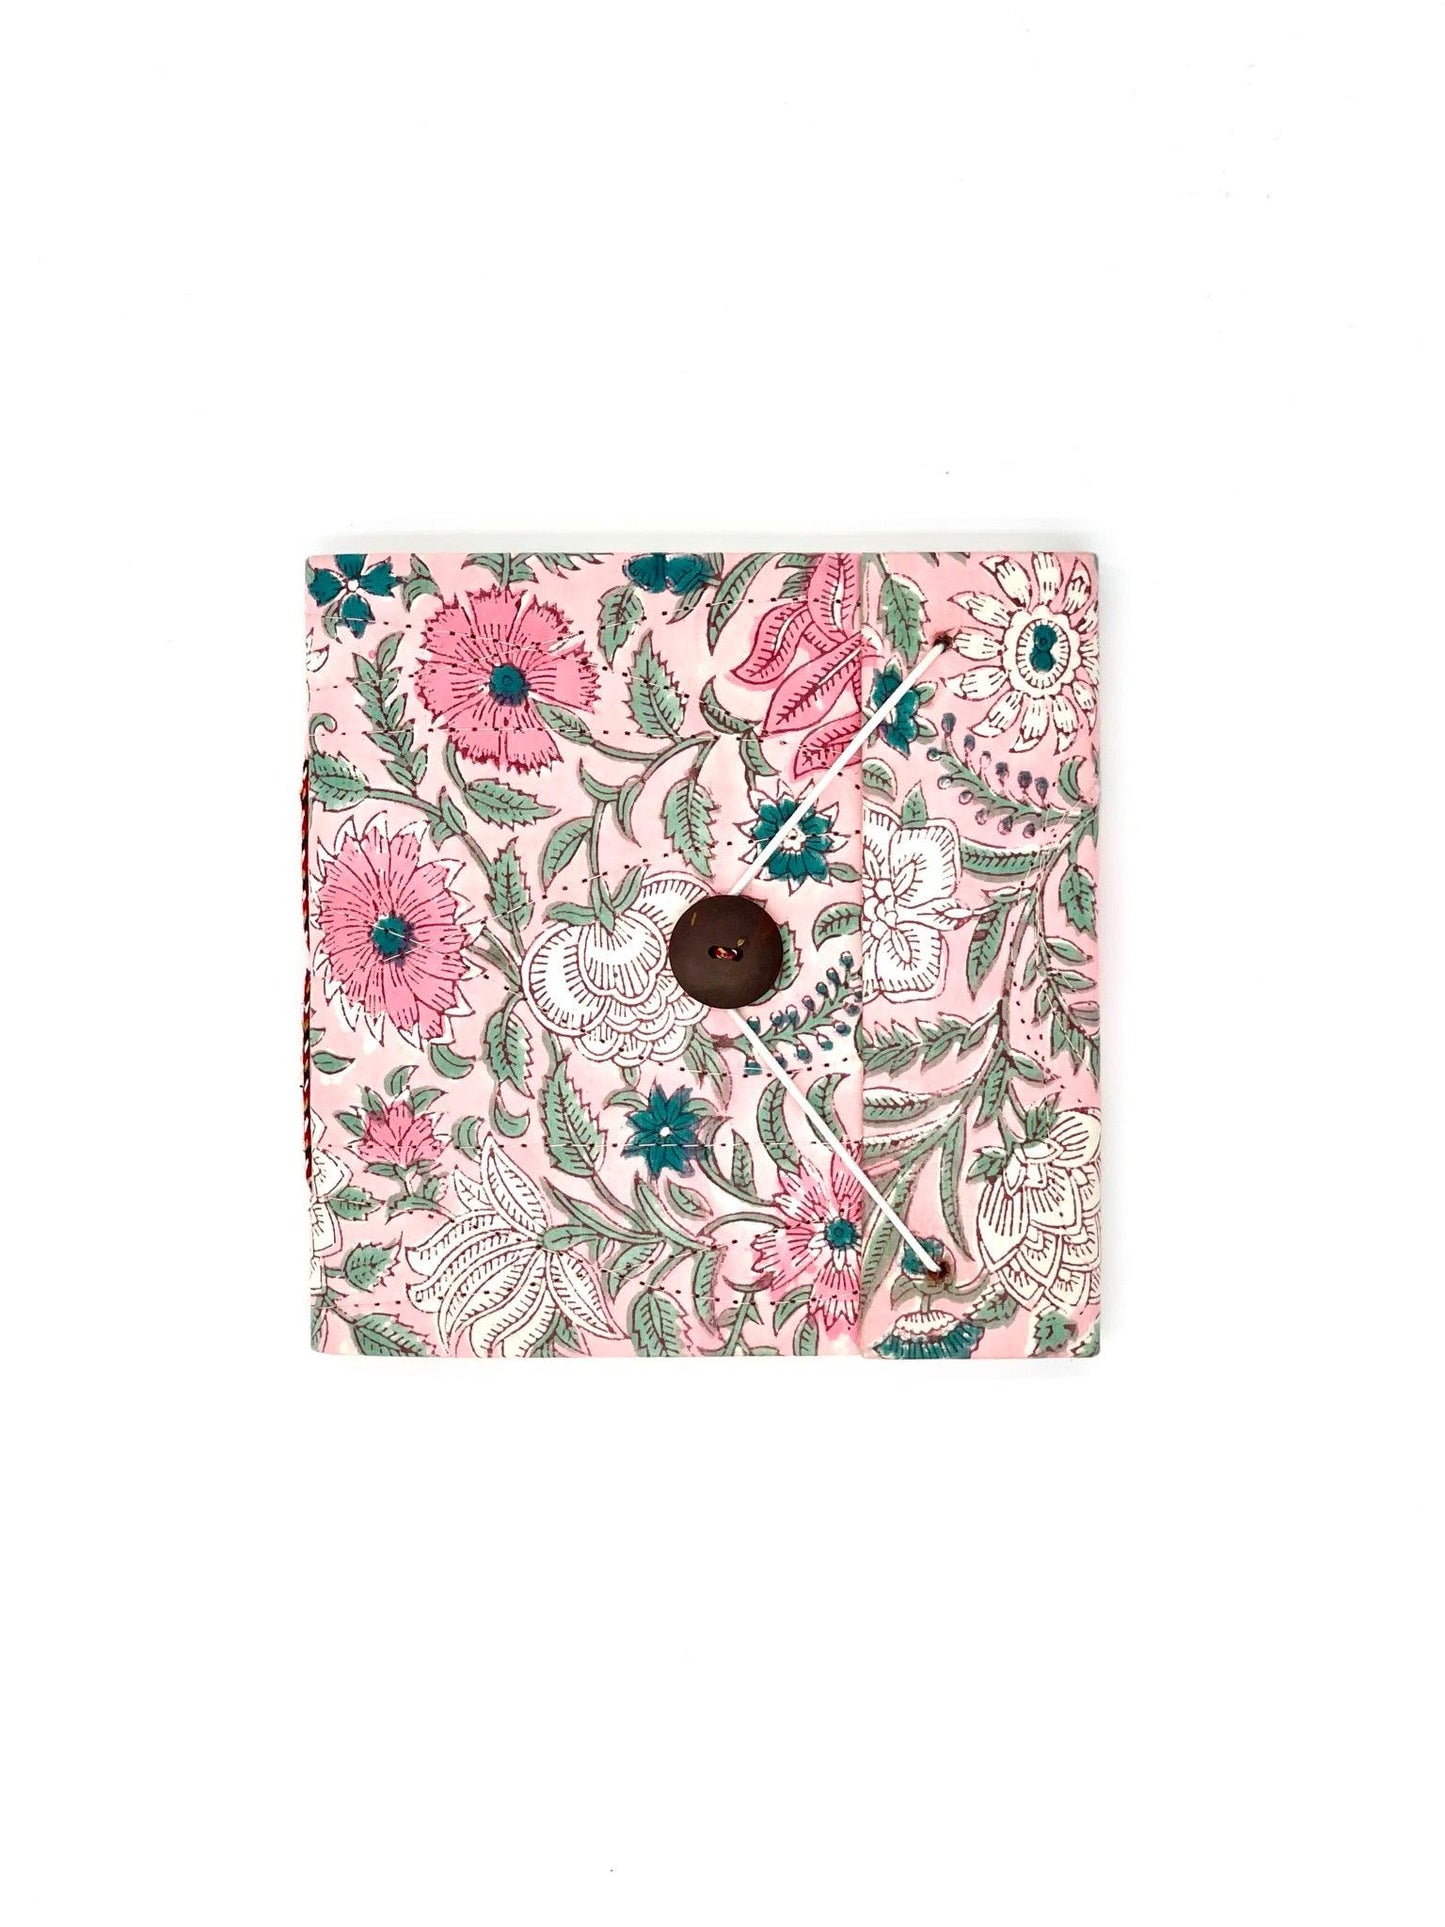 Block Print Journal/Notebook, Pink Floral - Unlined, 100 Pages, Thick Paper, Hard Cover - Transcend